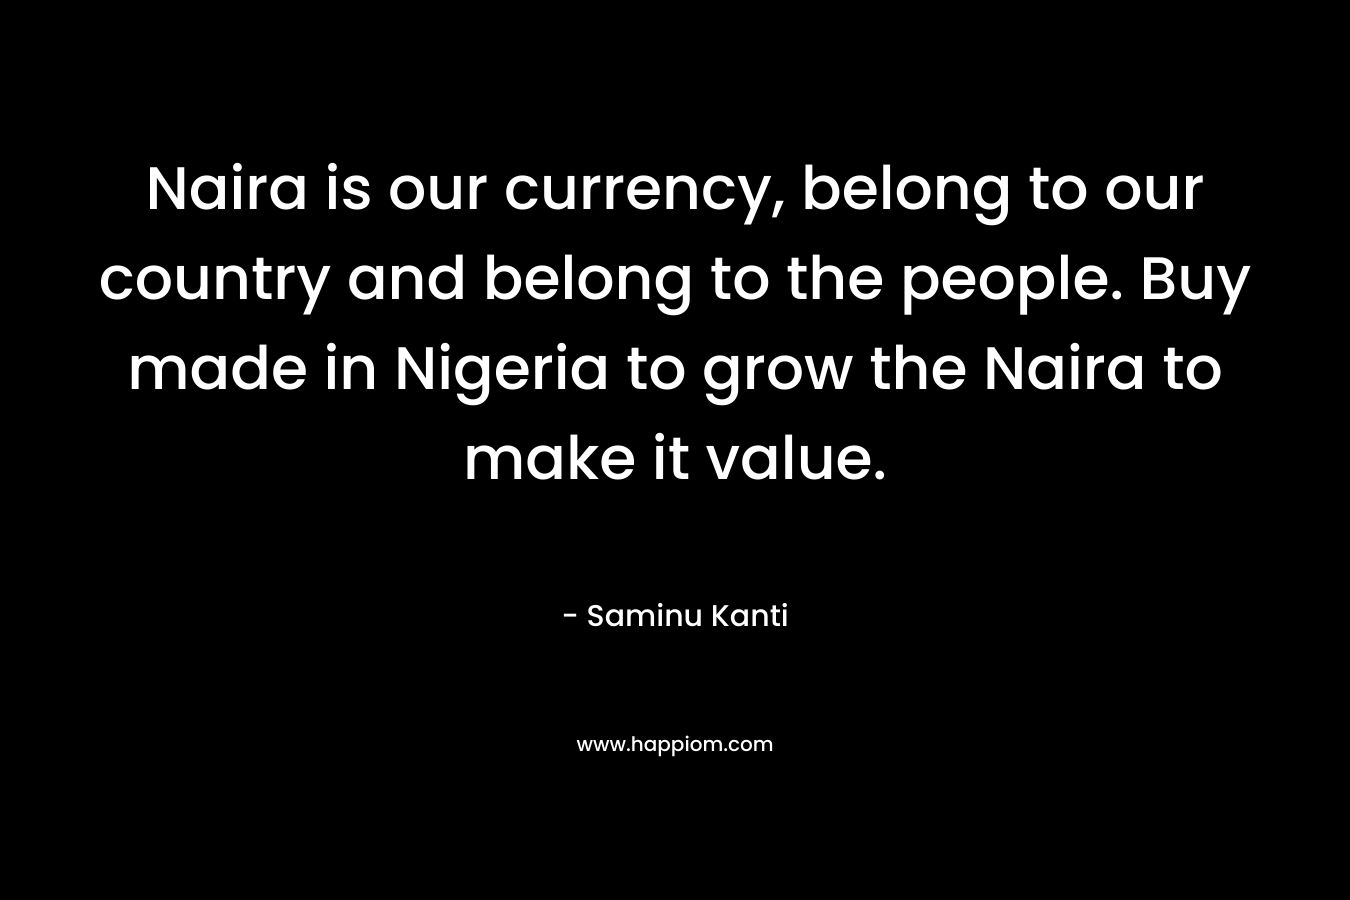 Naira is our currency, belong to our country and belong to the people. Buy made in Nigeria to grow the Naira to make it value.